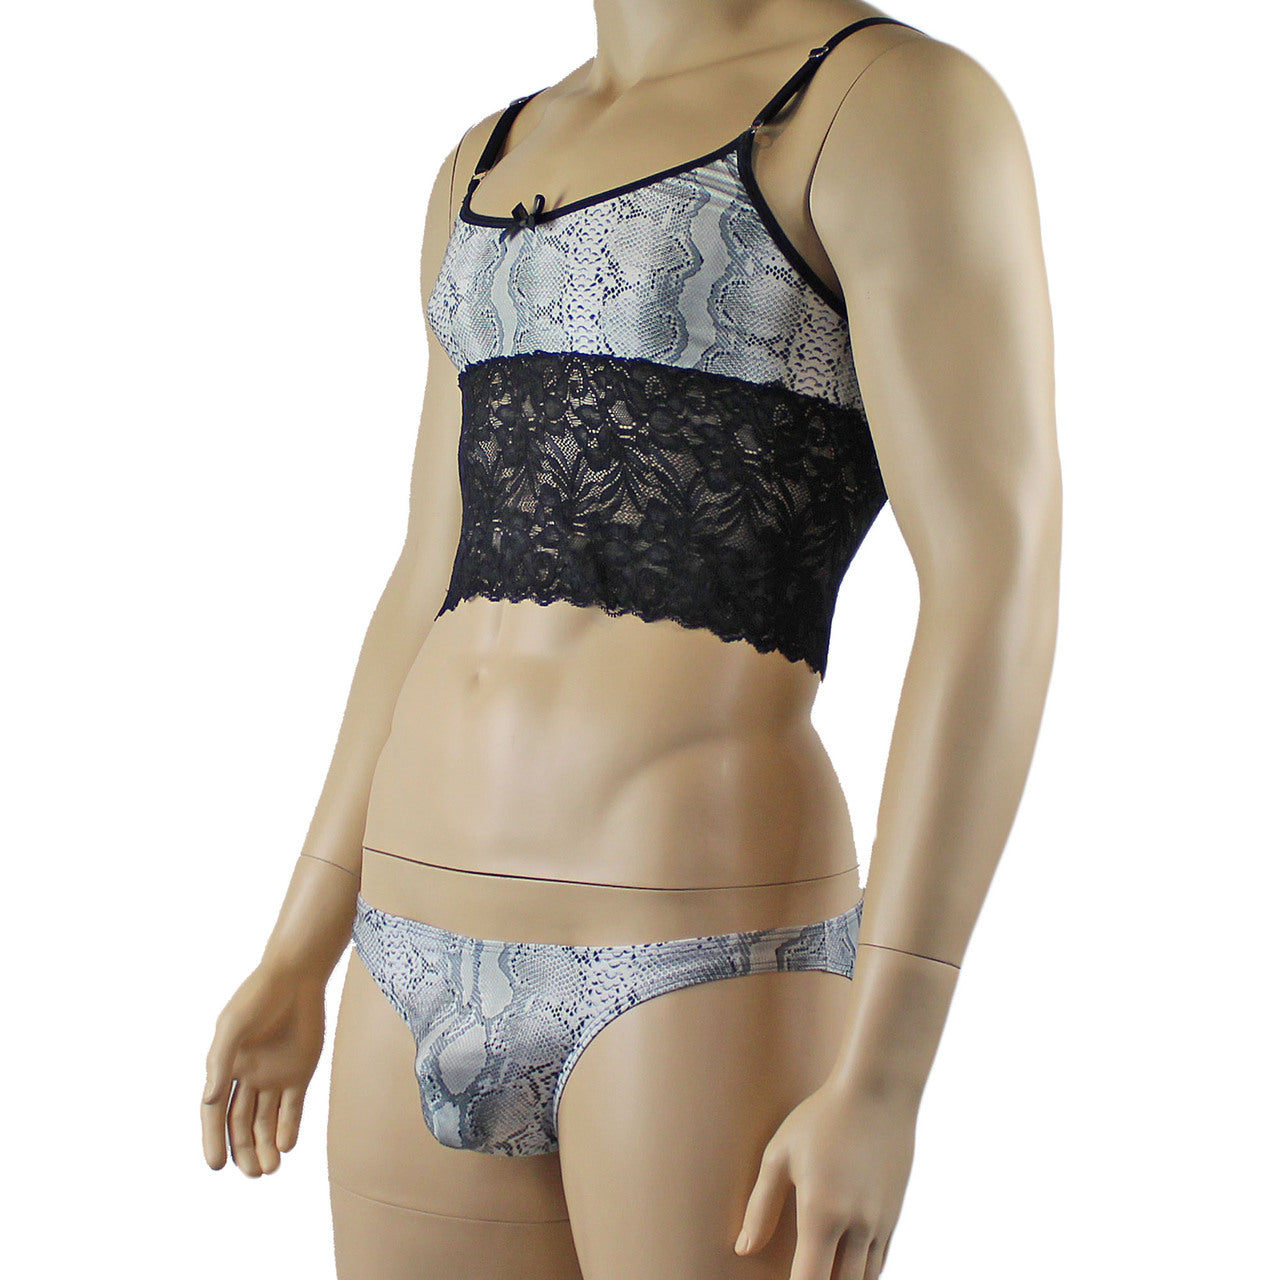 Mens Grey Snake Print & Black Lace Bra Top Camisole and Brief